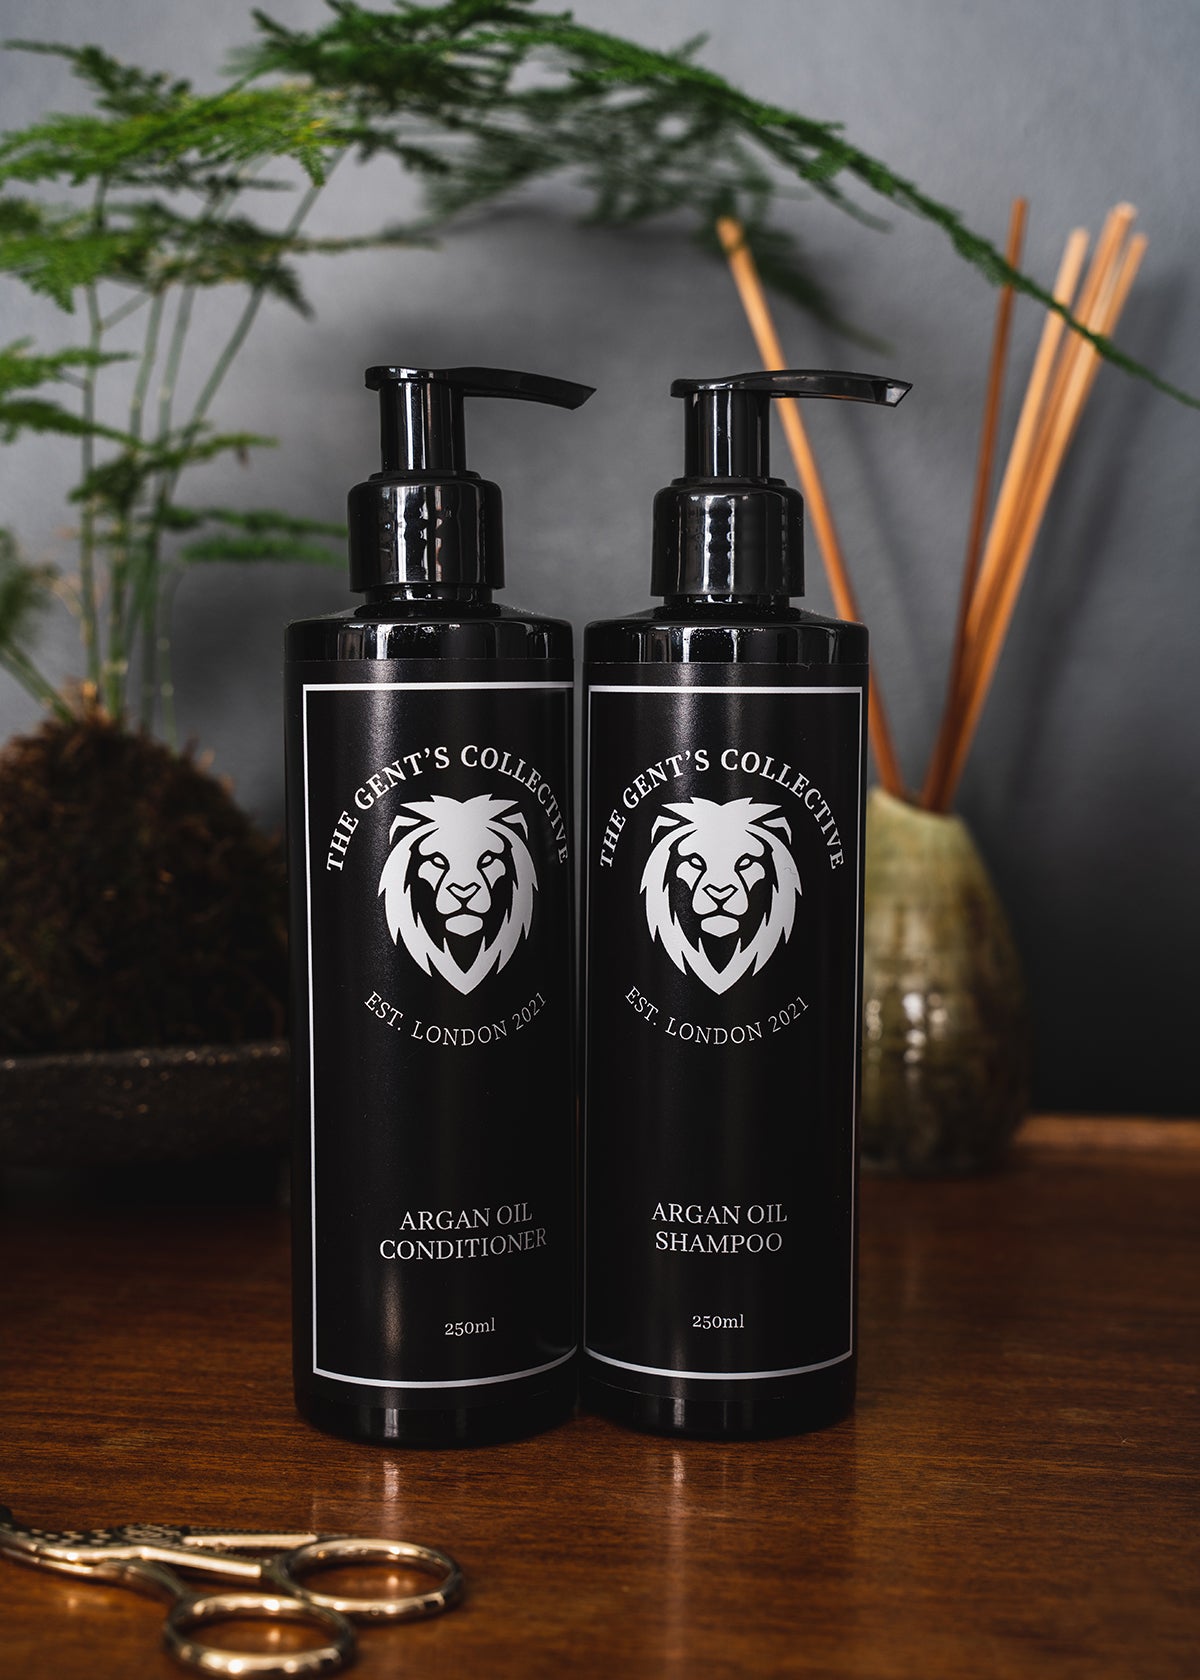 Argan Oil Conditioner - The Gent's Collective